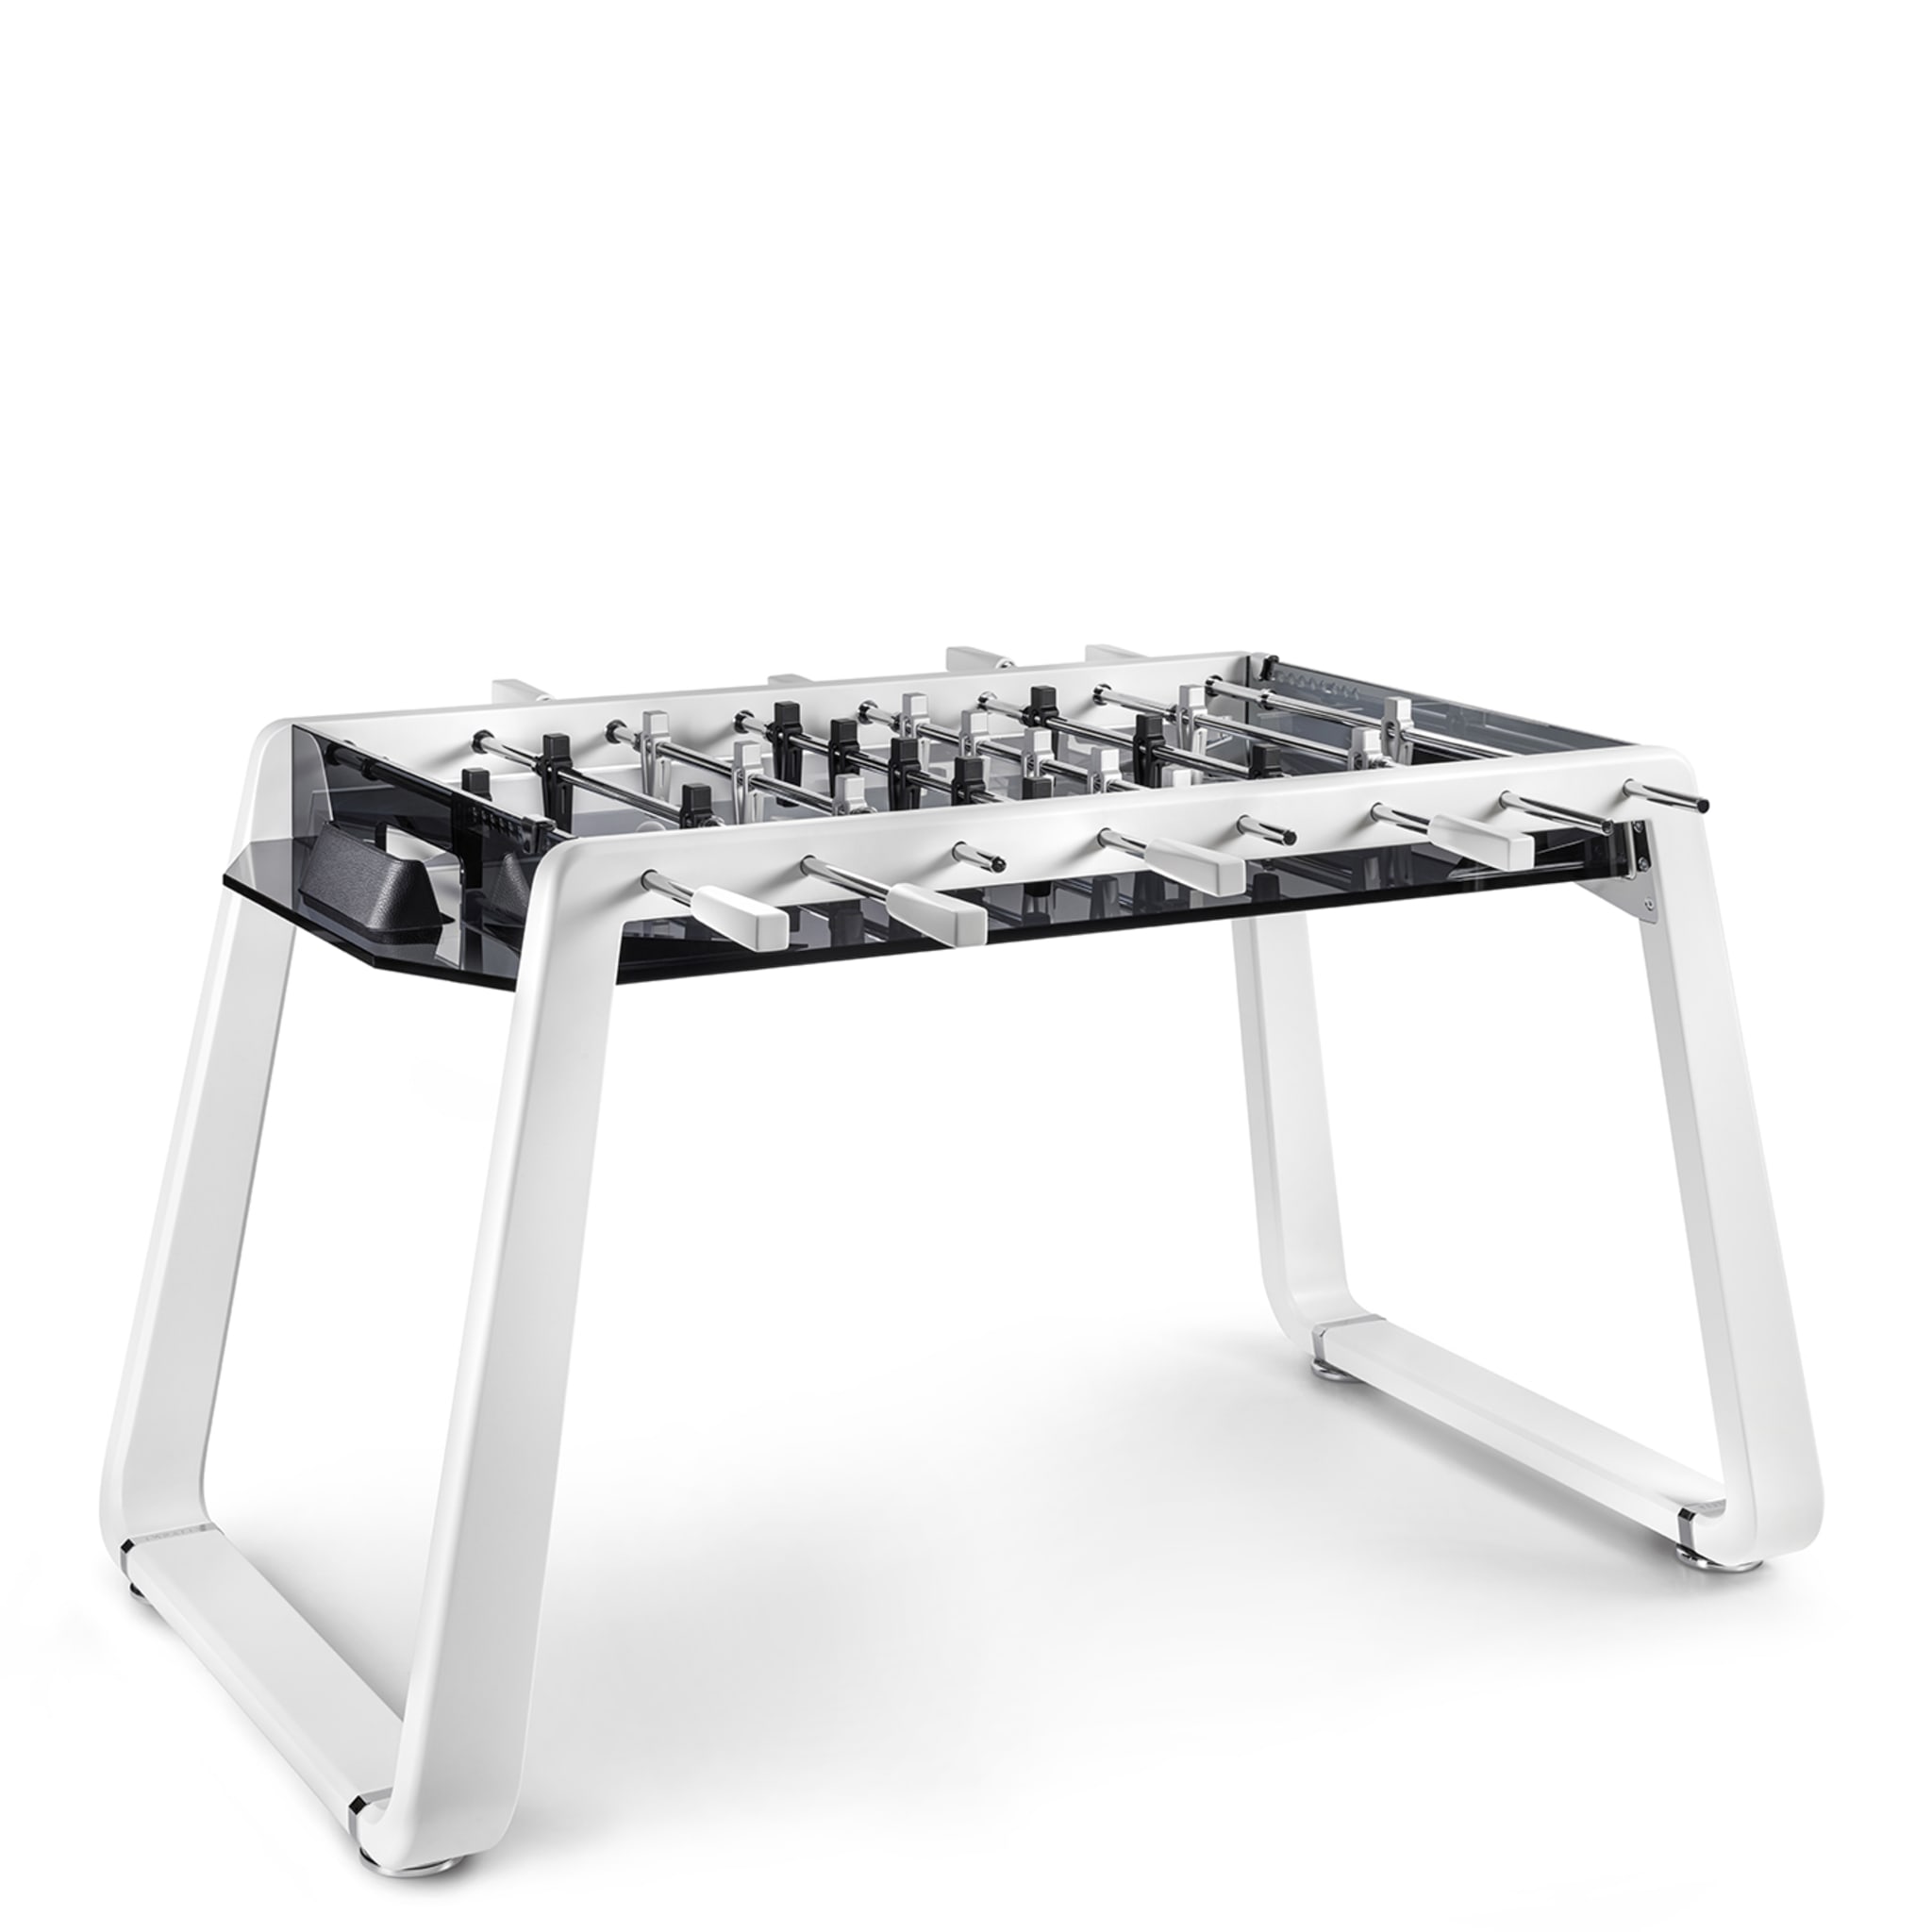 Derby Canvas Smoked Glass Foosball Table - Alternative view 1